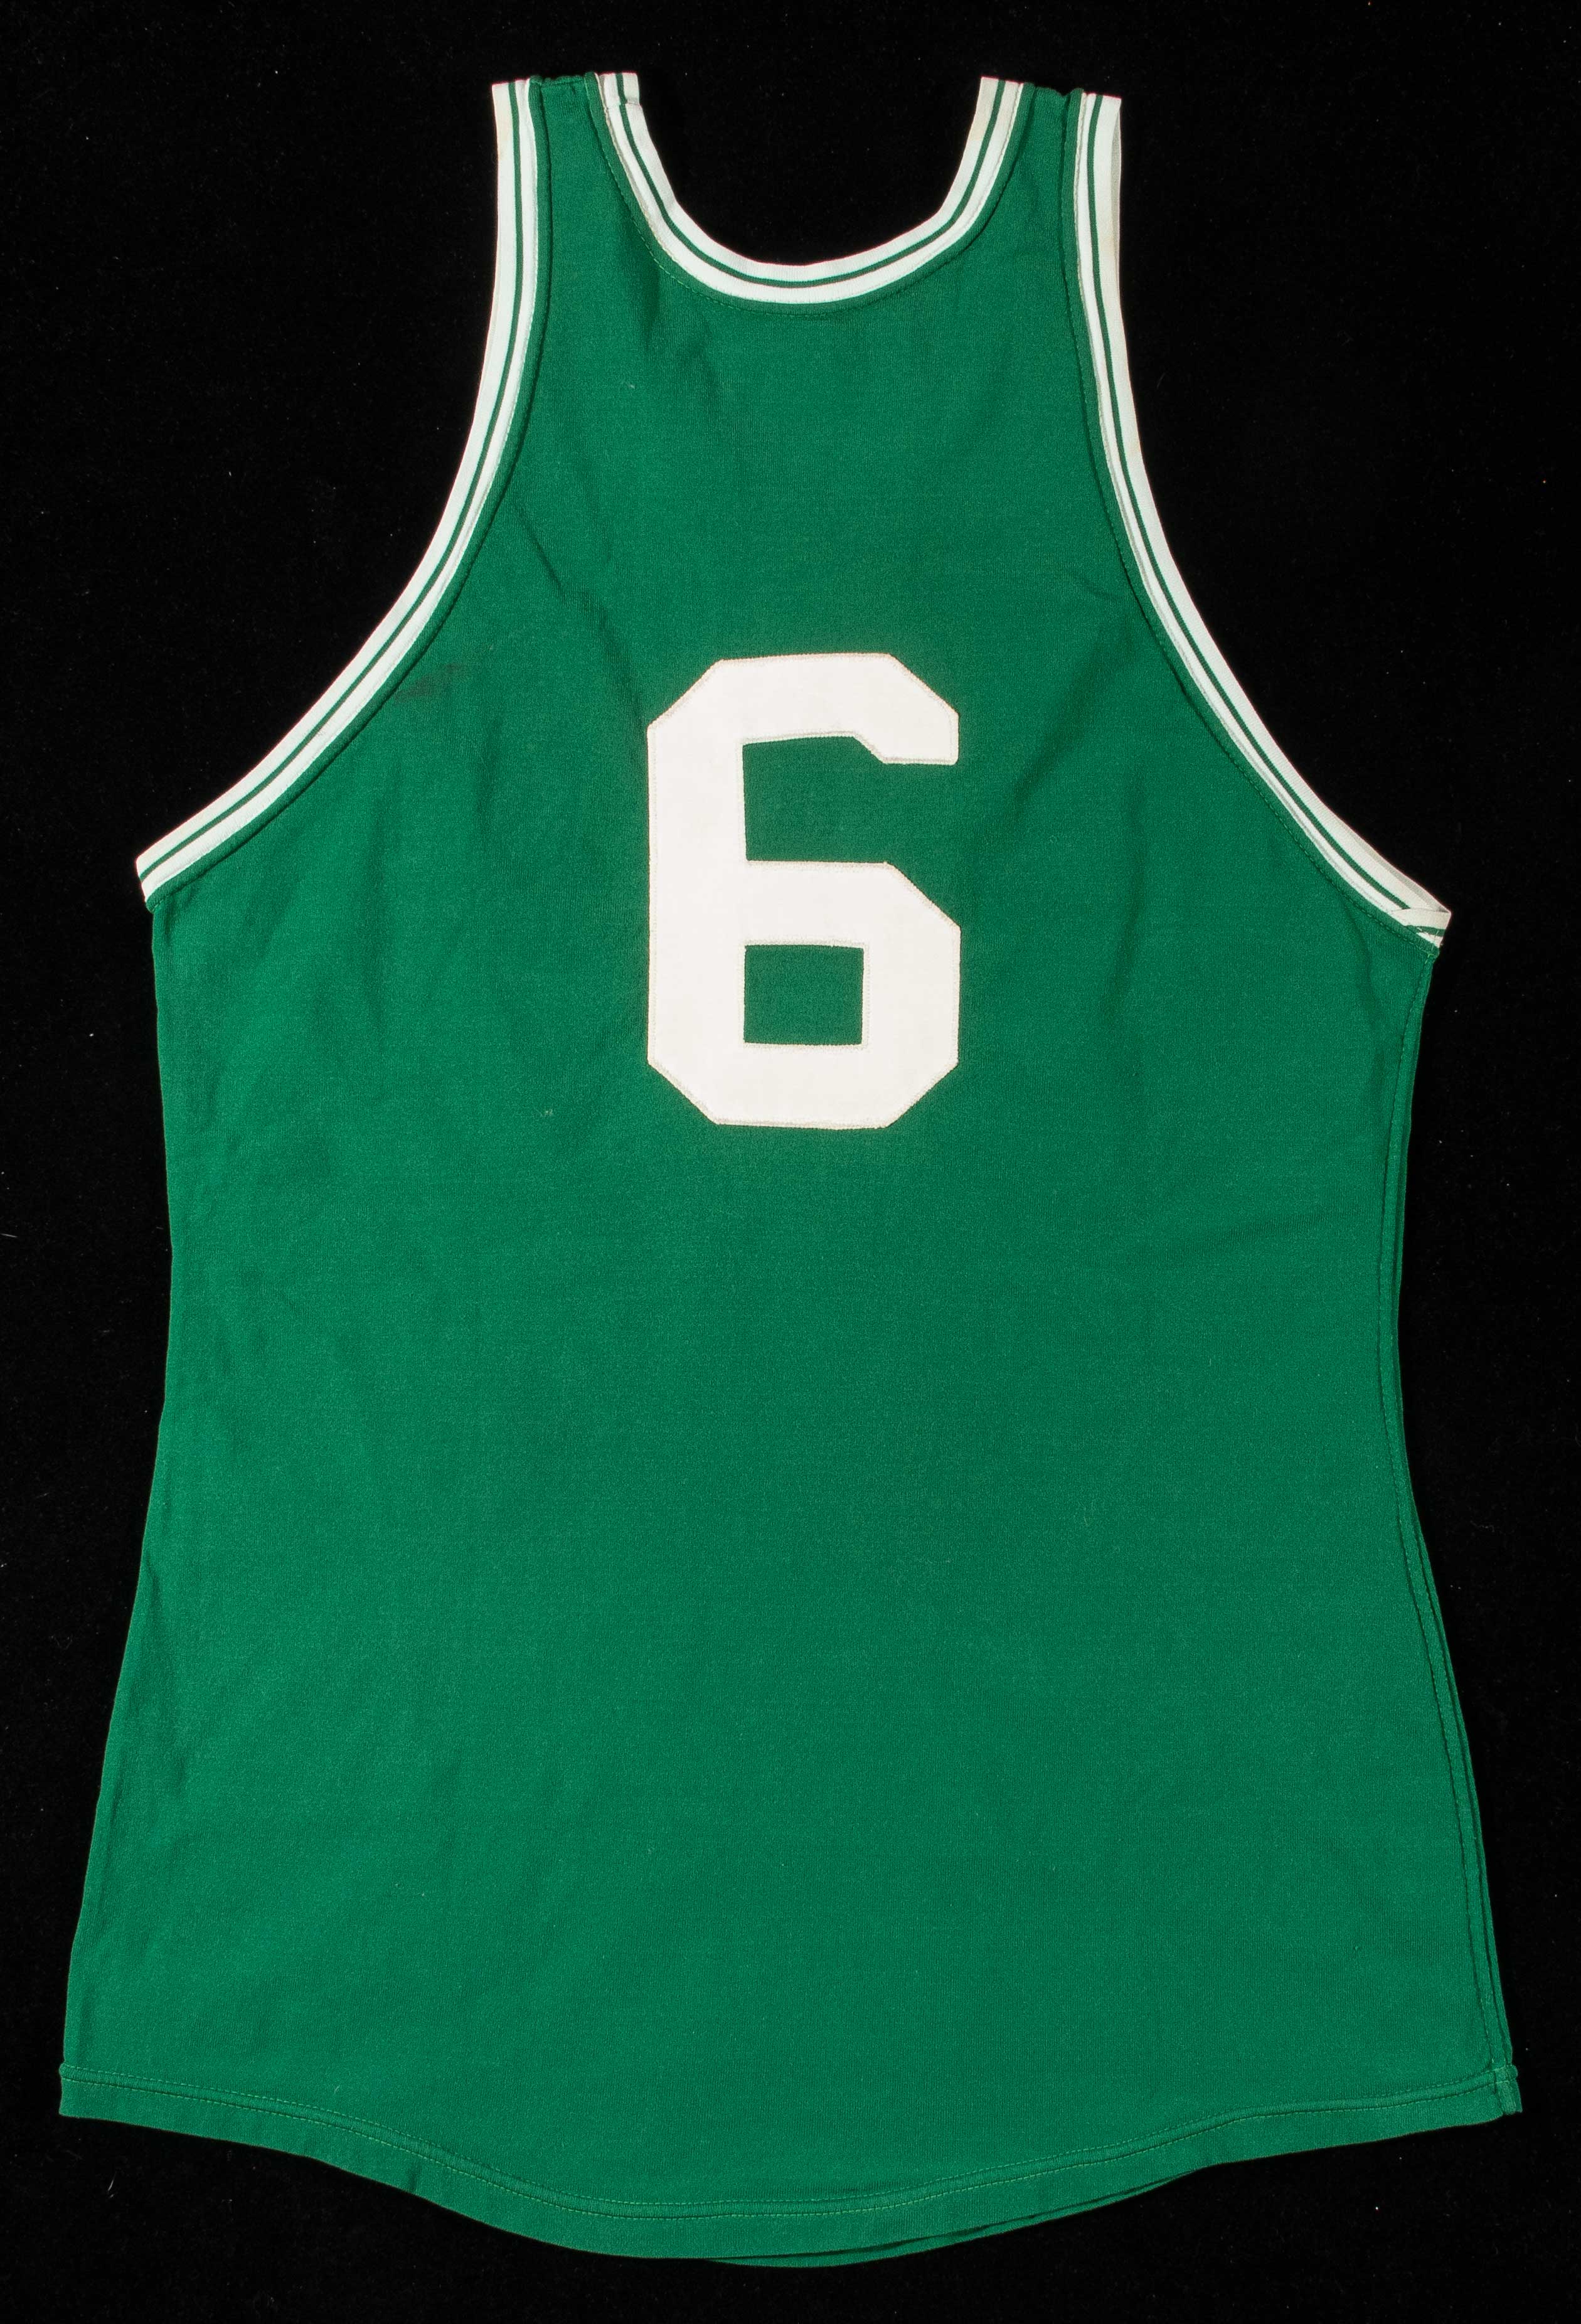 Game-worn, autographed Bill Russell jersey sells for $1 million - ESPN